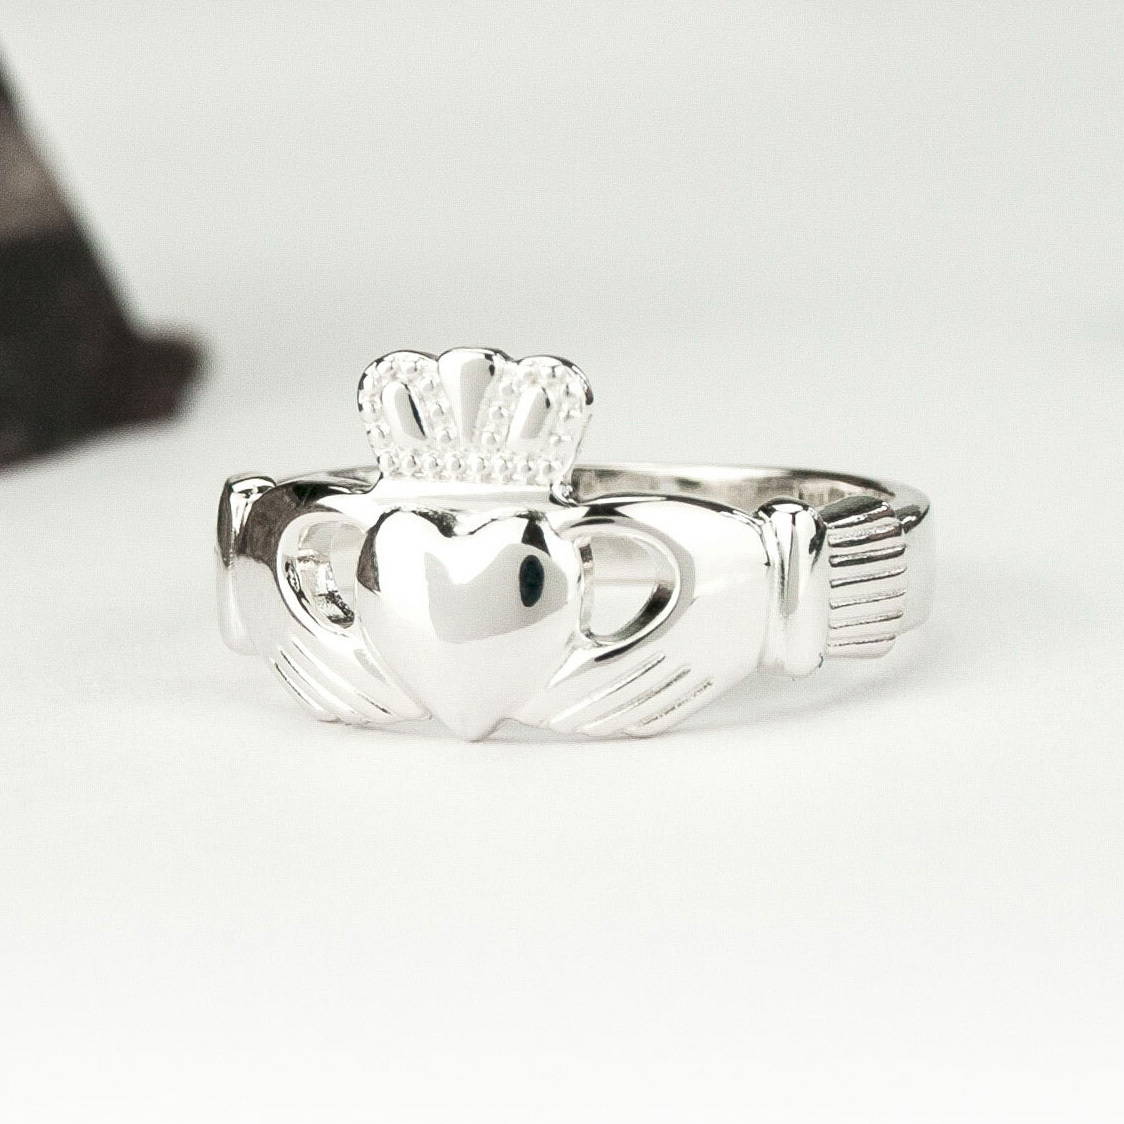 How to Wear a Claddagh Ring When You're Single, Engaged or Married